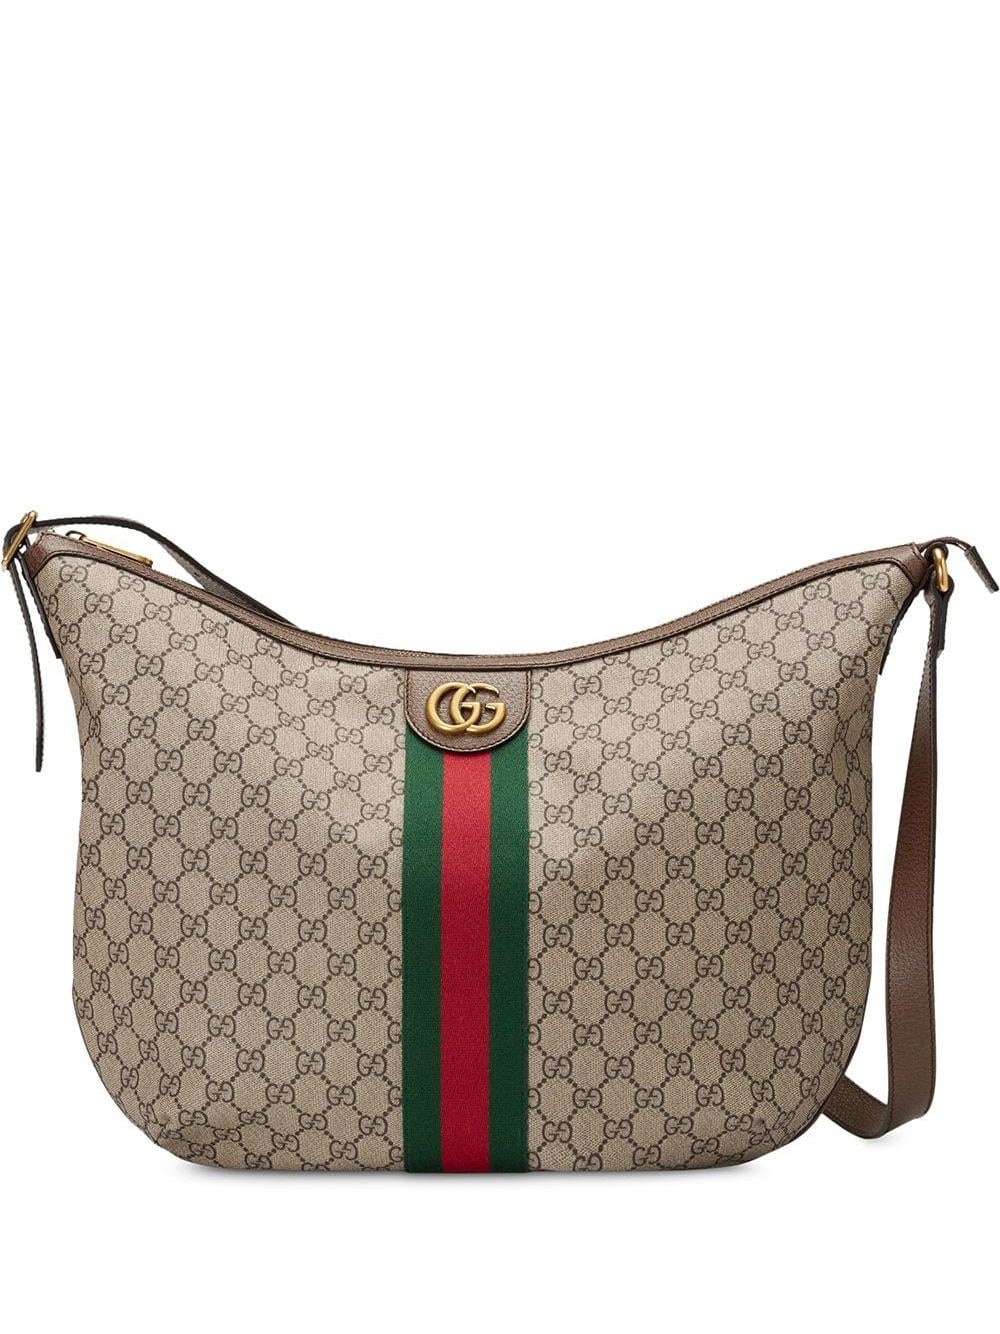 Gucci Ophidia gg small Shoulder Bag